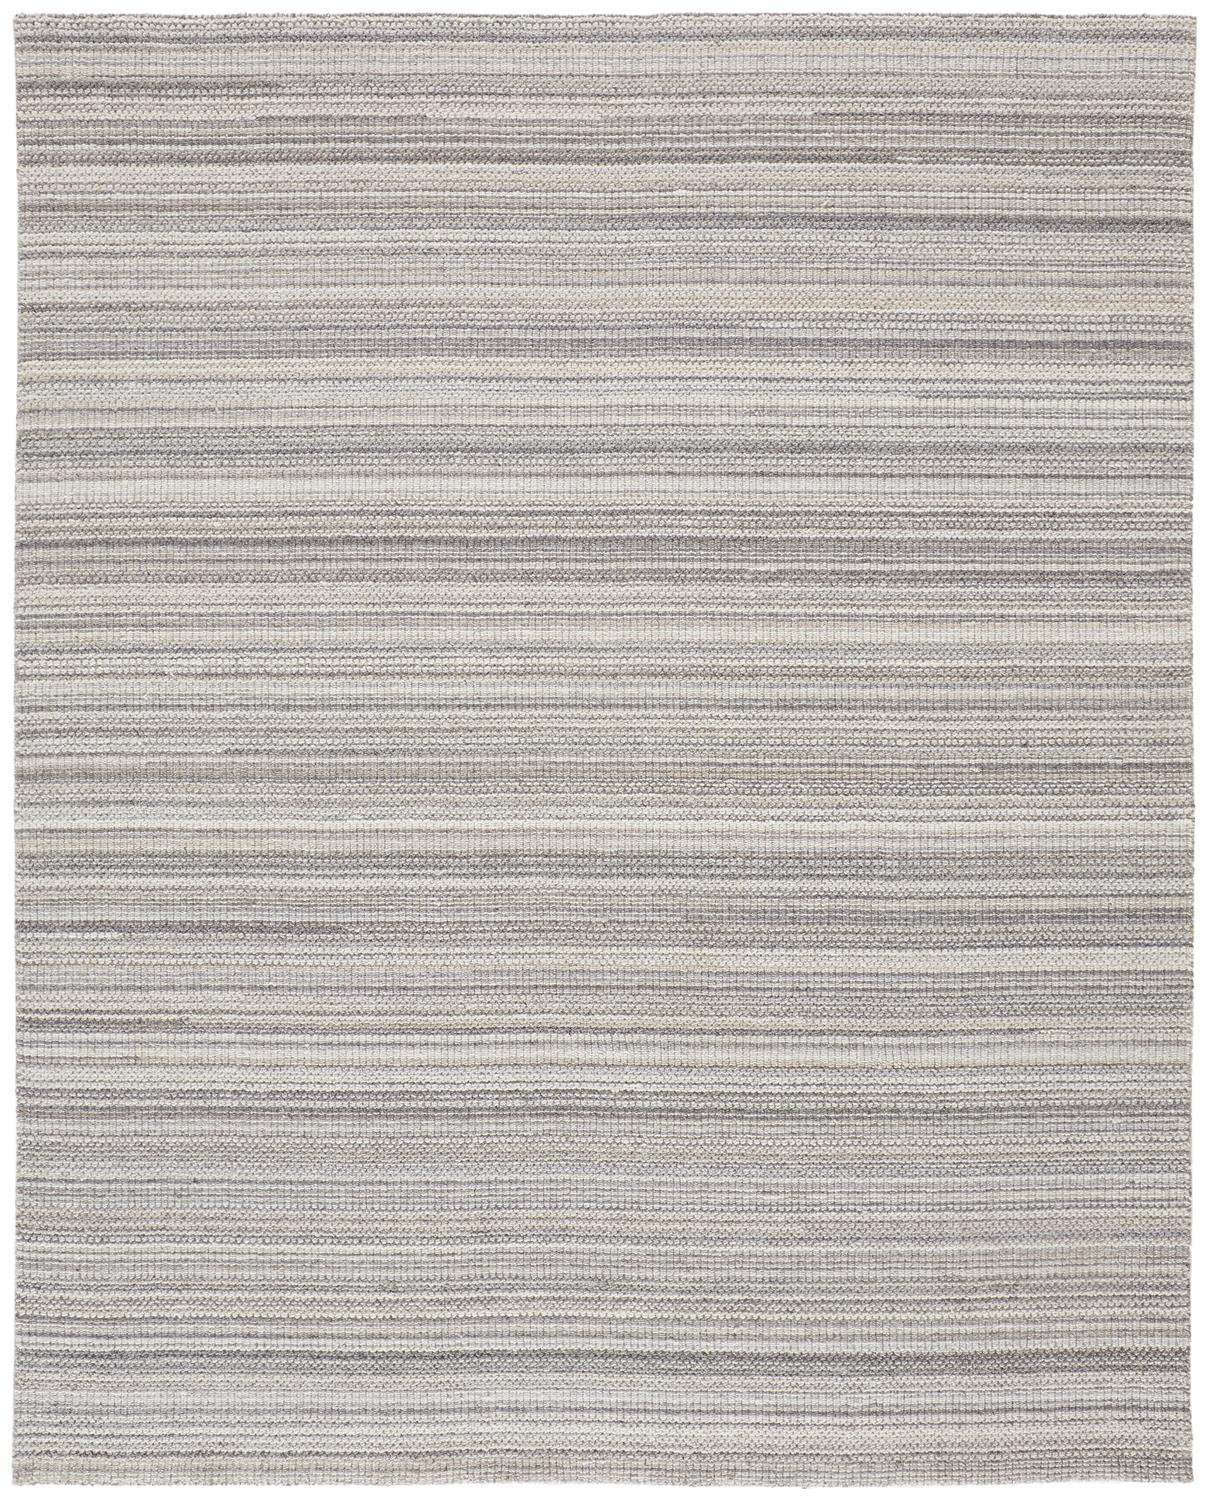 4' X 6' Gray And Taupe Wool Hand Woven Stain Resistant Area Rug-514044-1